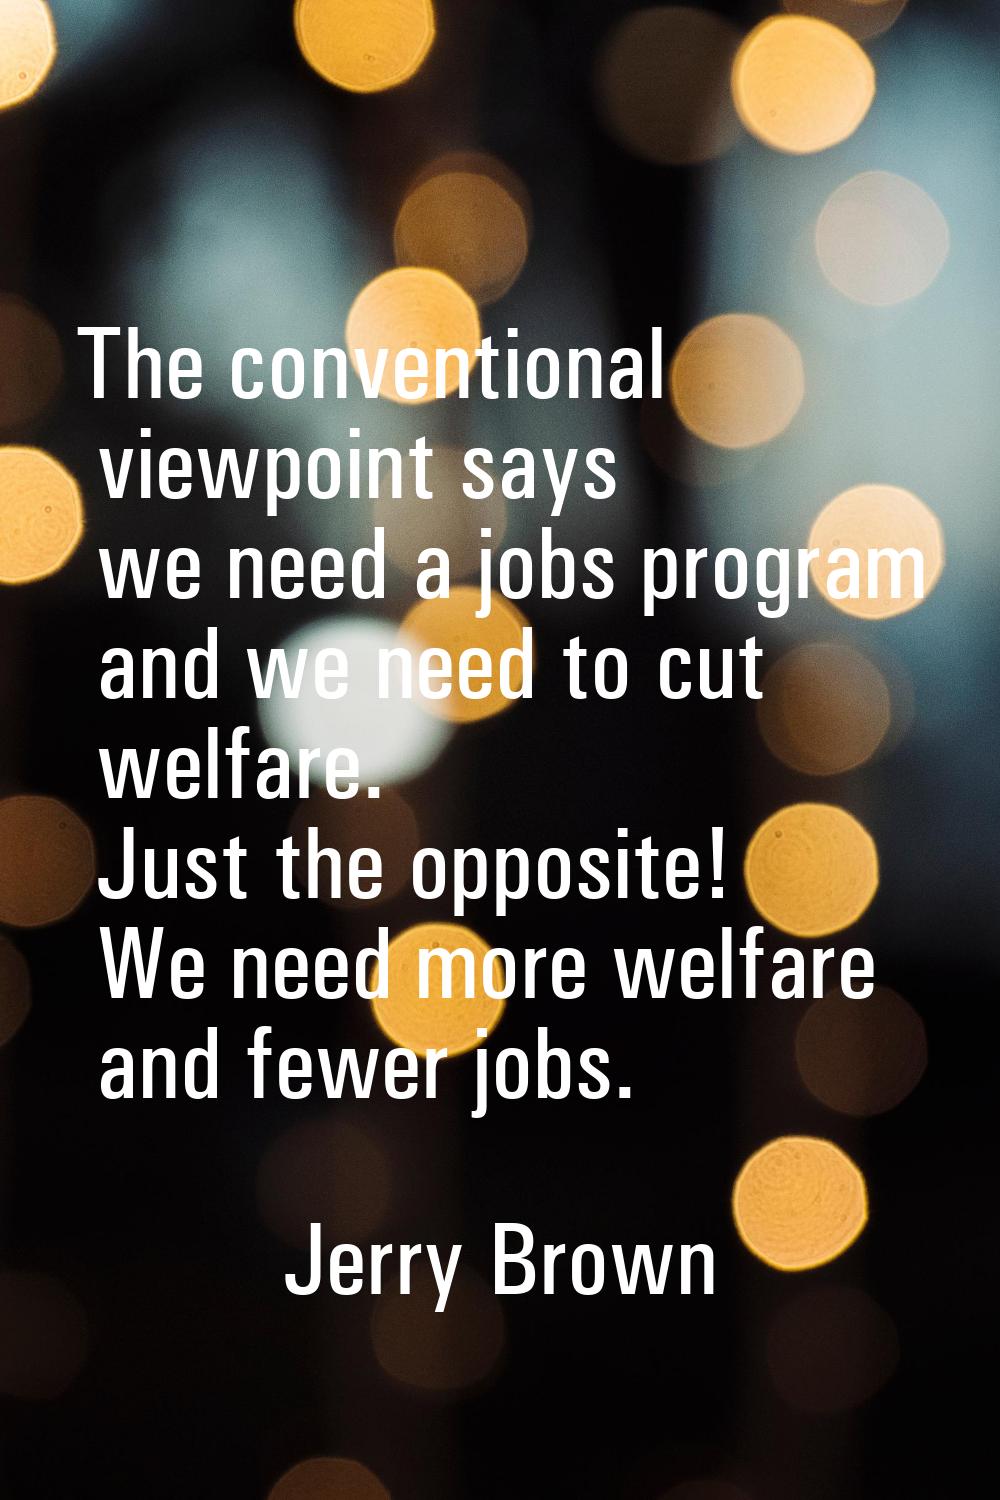 The conventional viewpoint says we need a jobs program and we need to cut welfare. Just the opposit